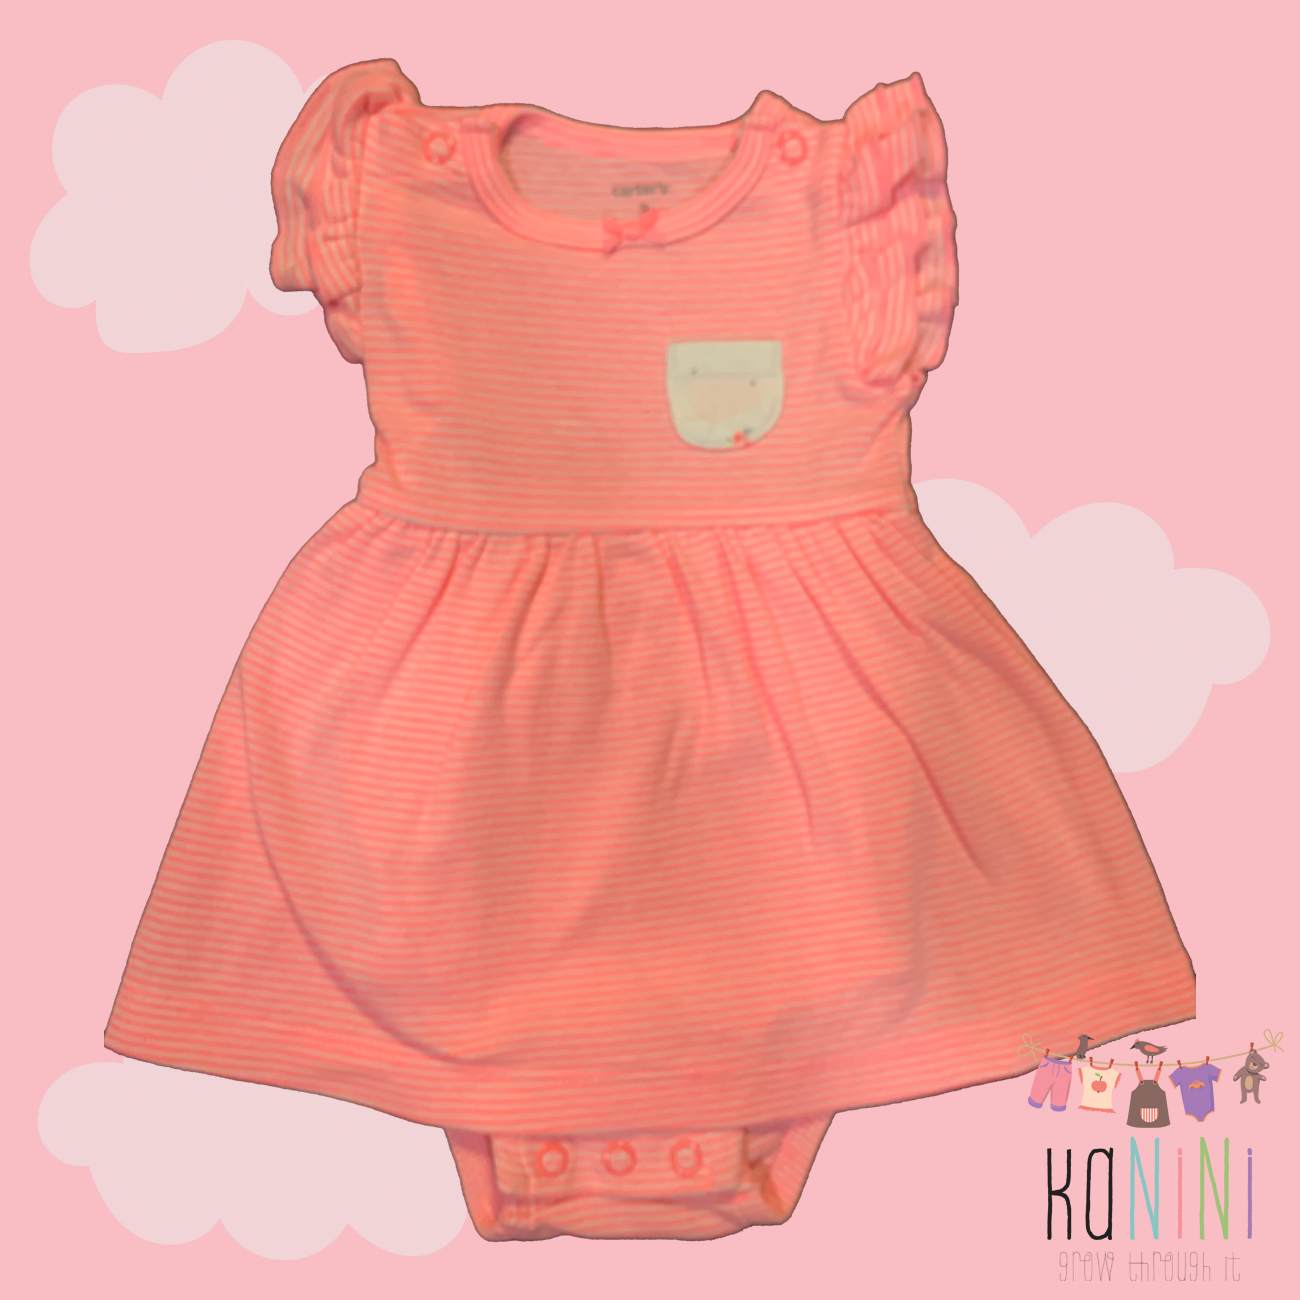 Featured image for “Carter's 3 Months Girls Dress & Shirt Outfit Set”